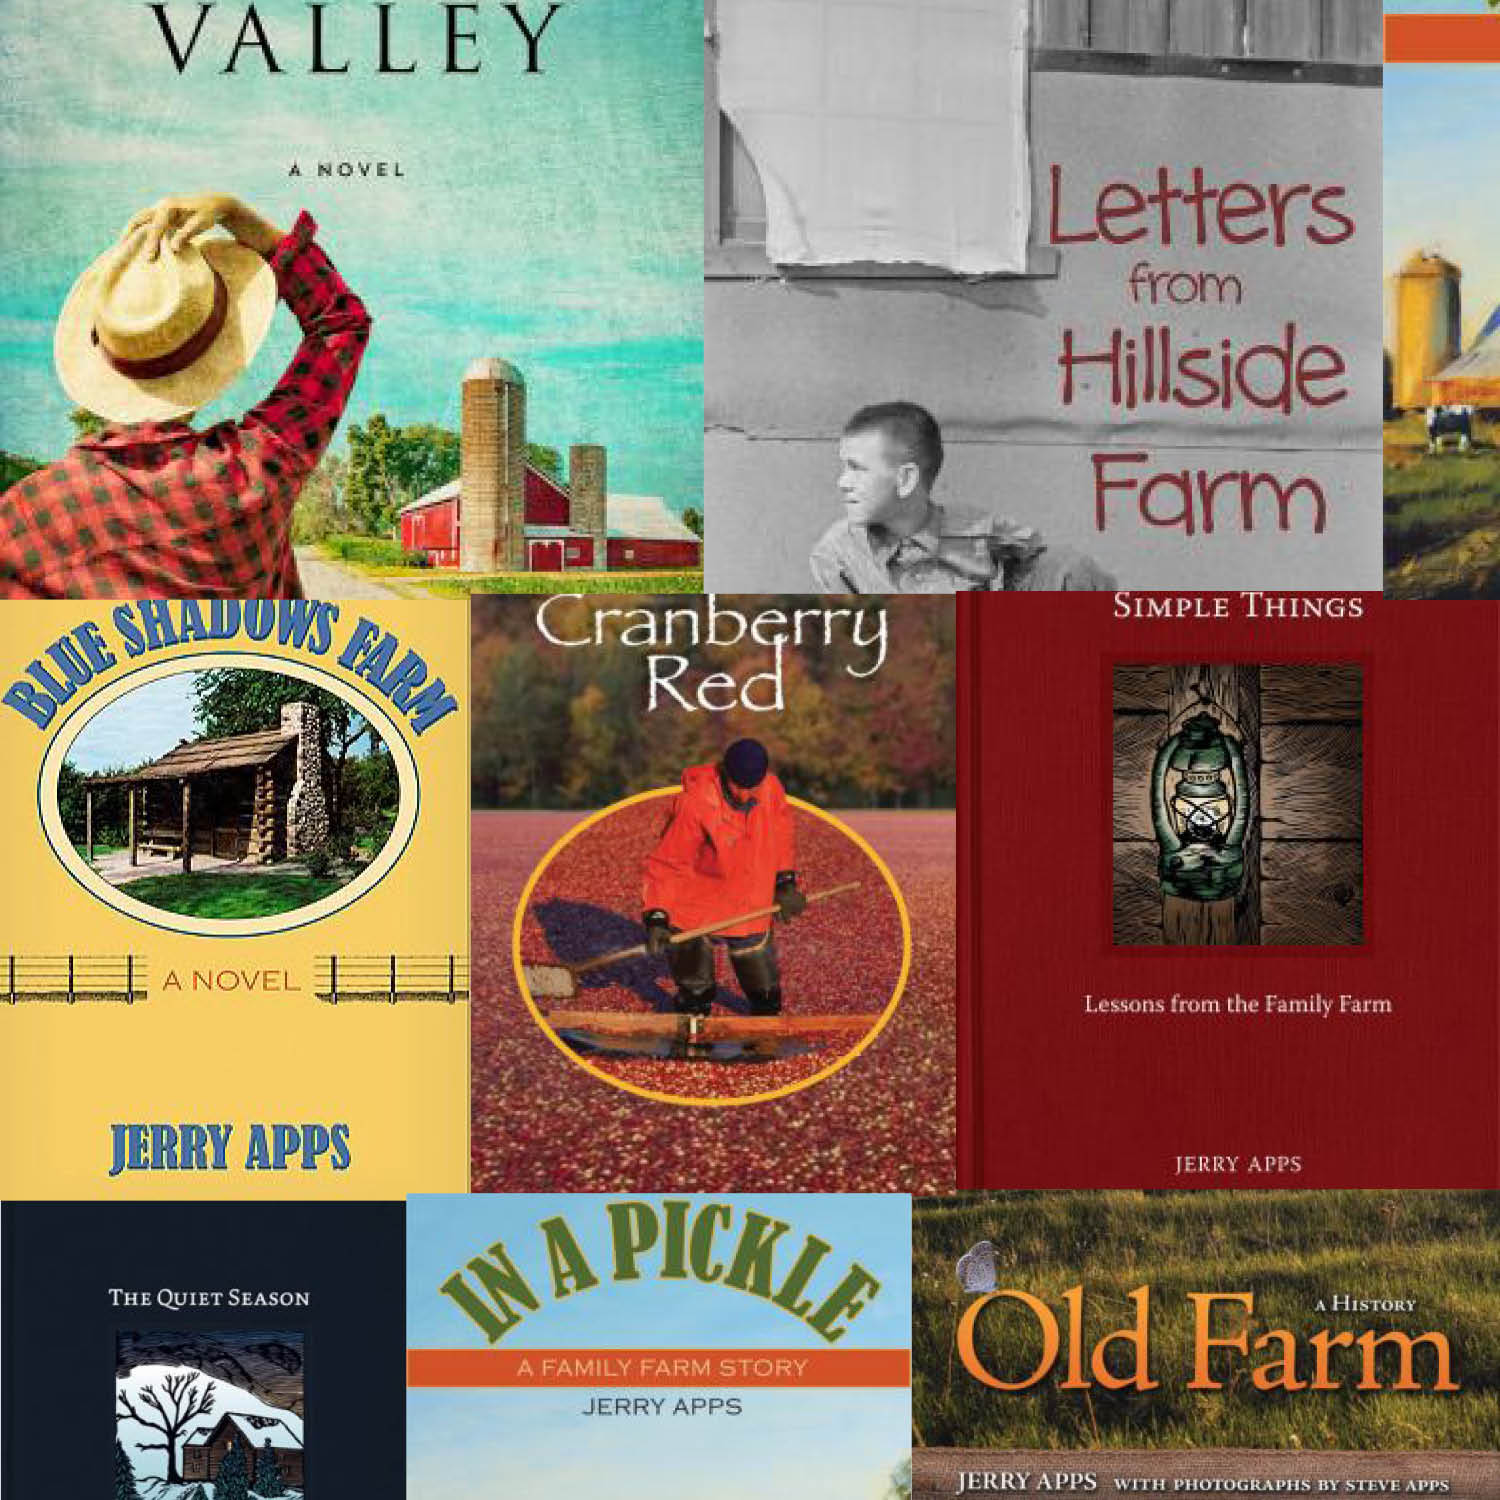 Who knew a farmer could write books?